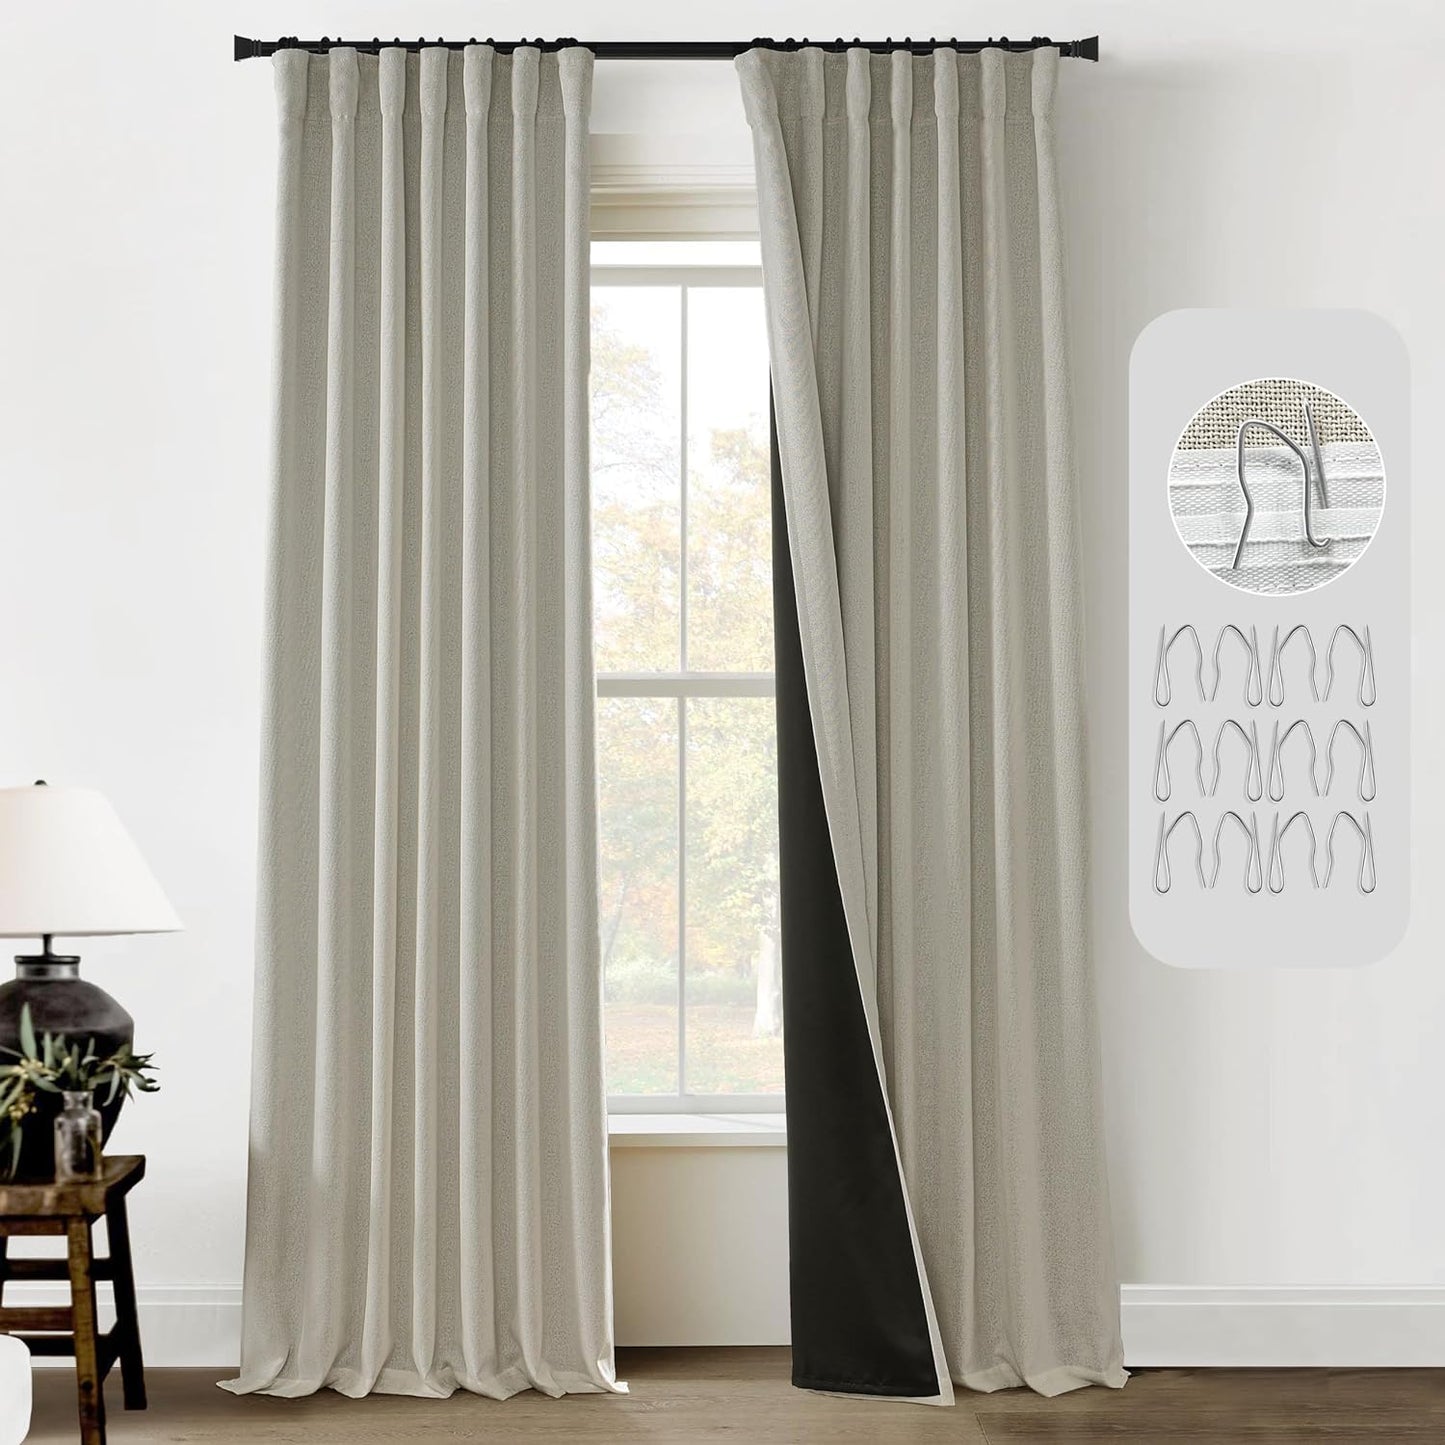 Sage Green Blackout Curtains 84 Inch Length 2 Panels Set for Bedroom Linen Aesthetic Boho Greyish Light Green Window Room Darkening Curtains for Living Room Kids Boys Room,Back Tab Pleated,84 in Long  PANELSBURG Greige/Warm Grey 50"W X 90"L 